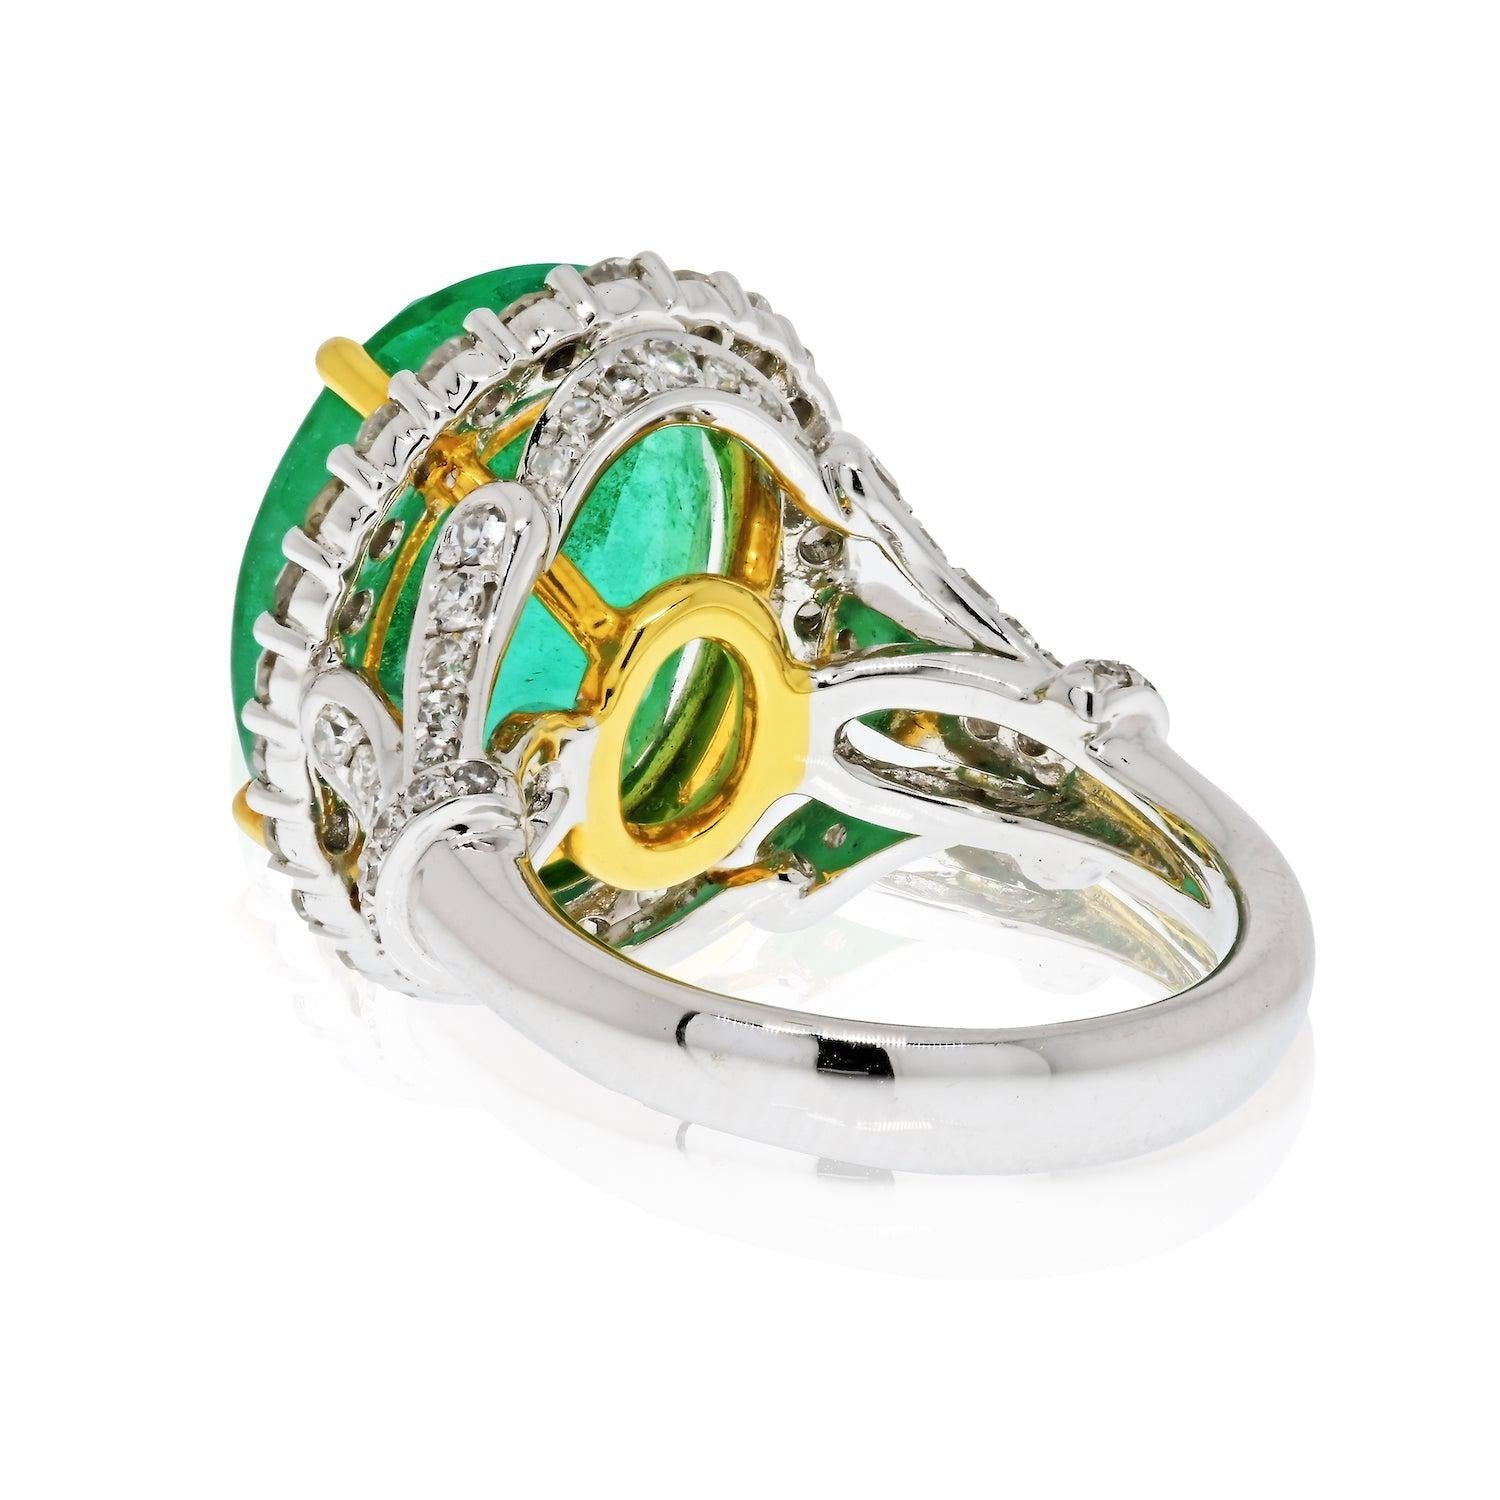 11 carat Colombian Emerald and Diamond Ring in 18k solid white gold - ASSAY